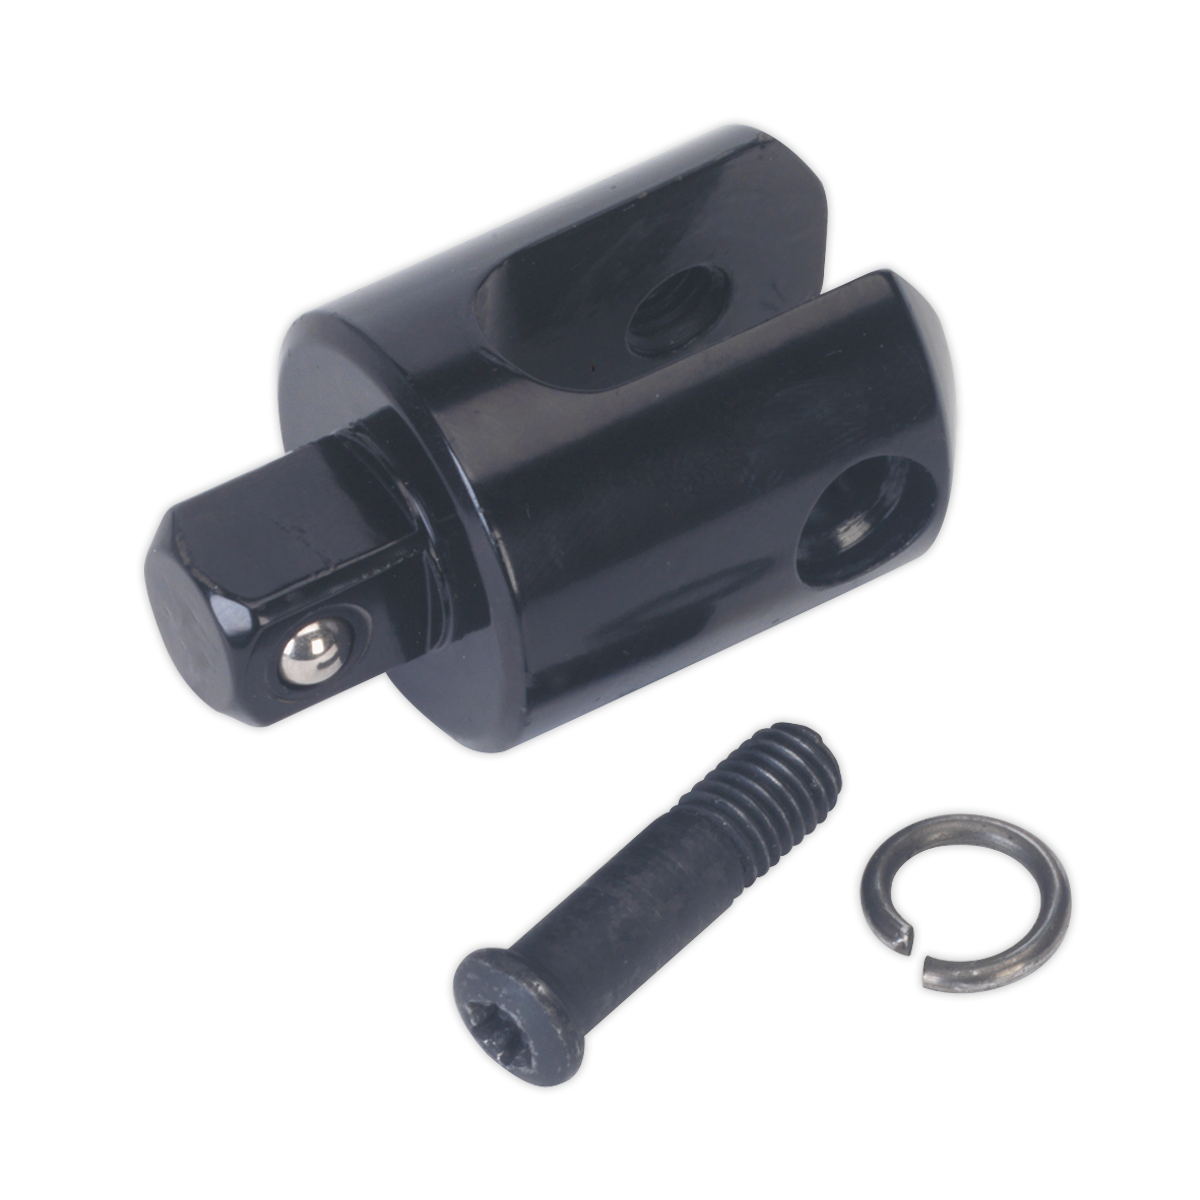 Sealey Knuckle 1/2"Sq Drive for AK7315